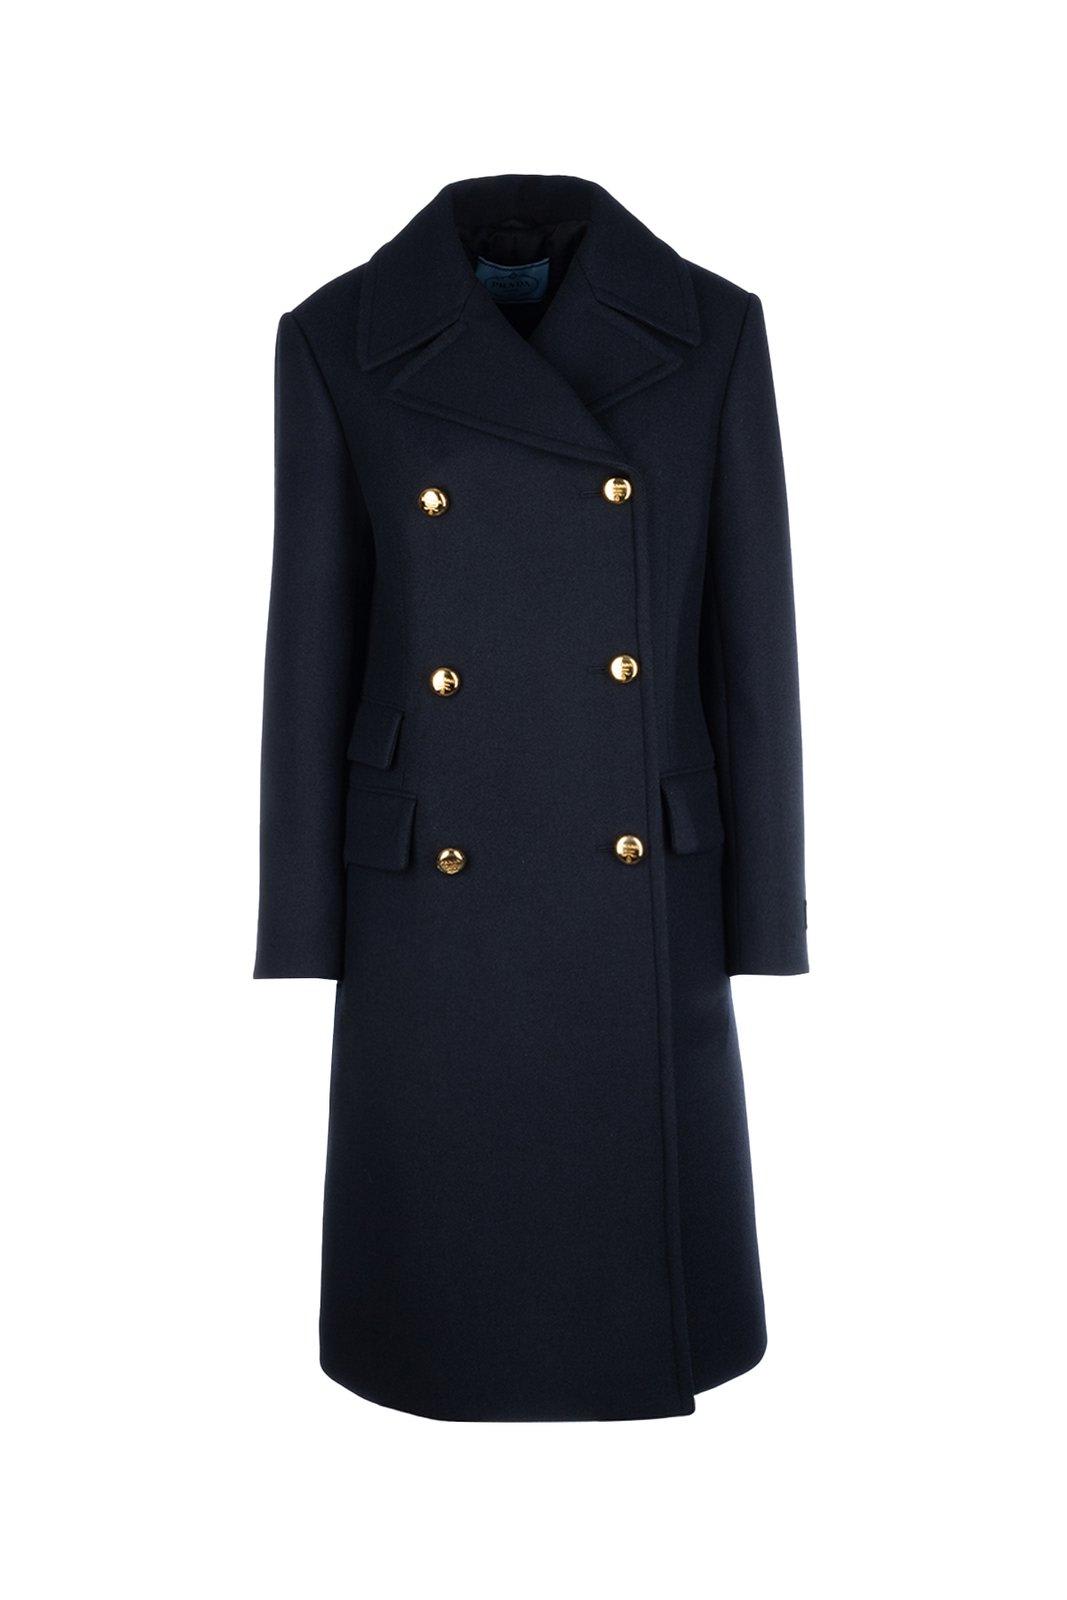 PRADA LOGO PATCH DOUBLE-BREASTED COAT